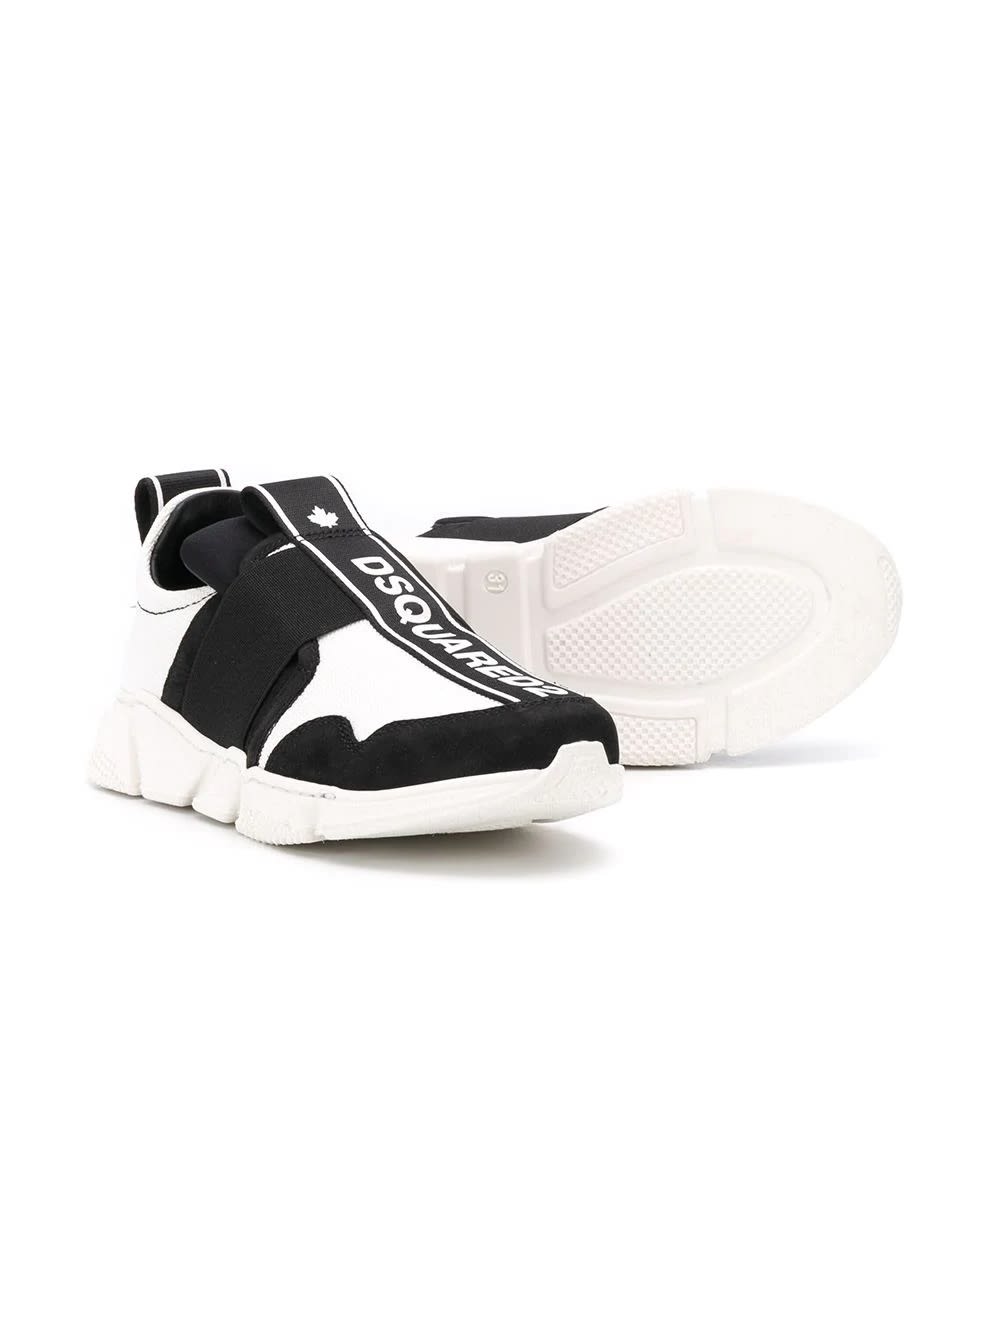 dsquared2 slip on sneakers